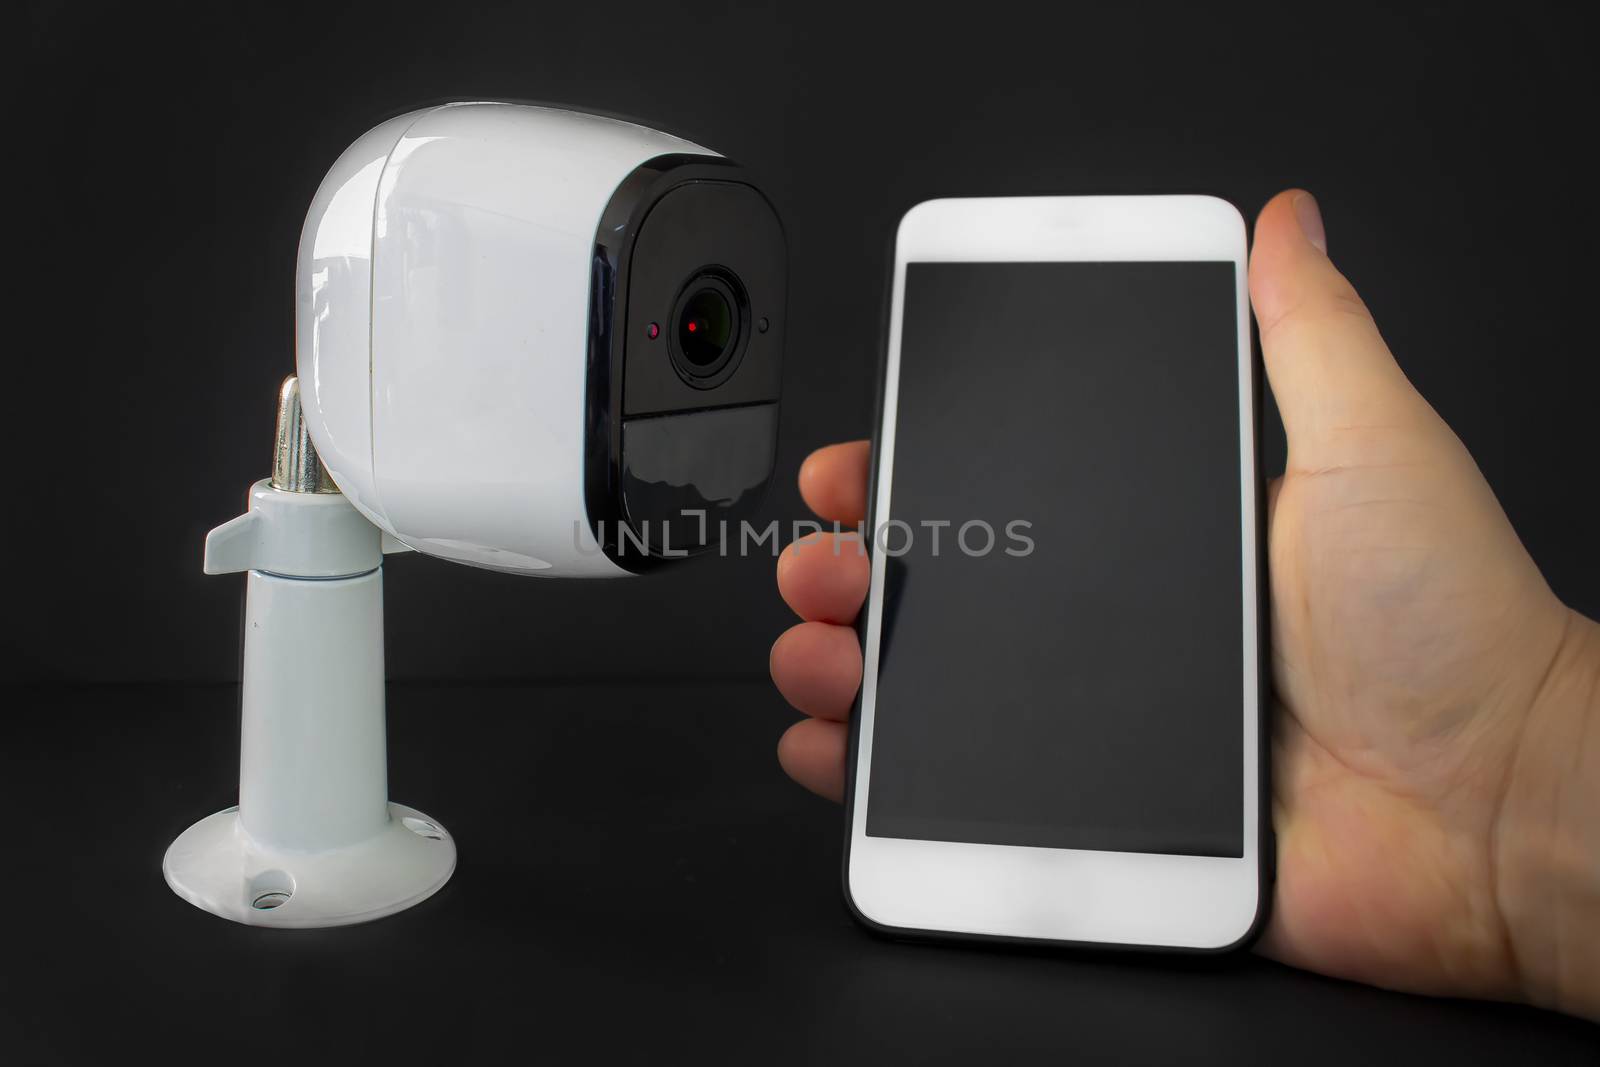 A smart security camera with a smart phone hold by a person